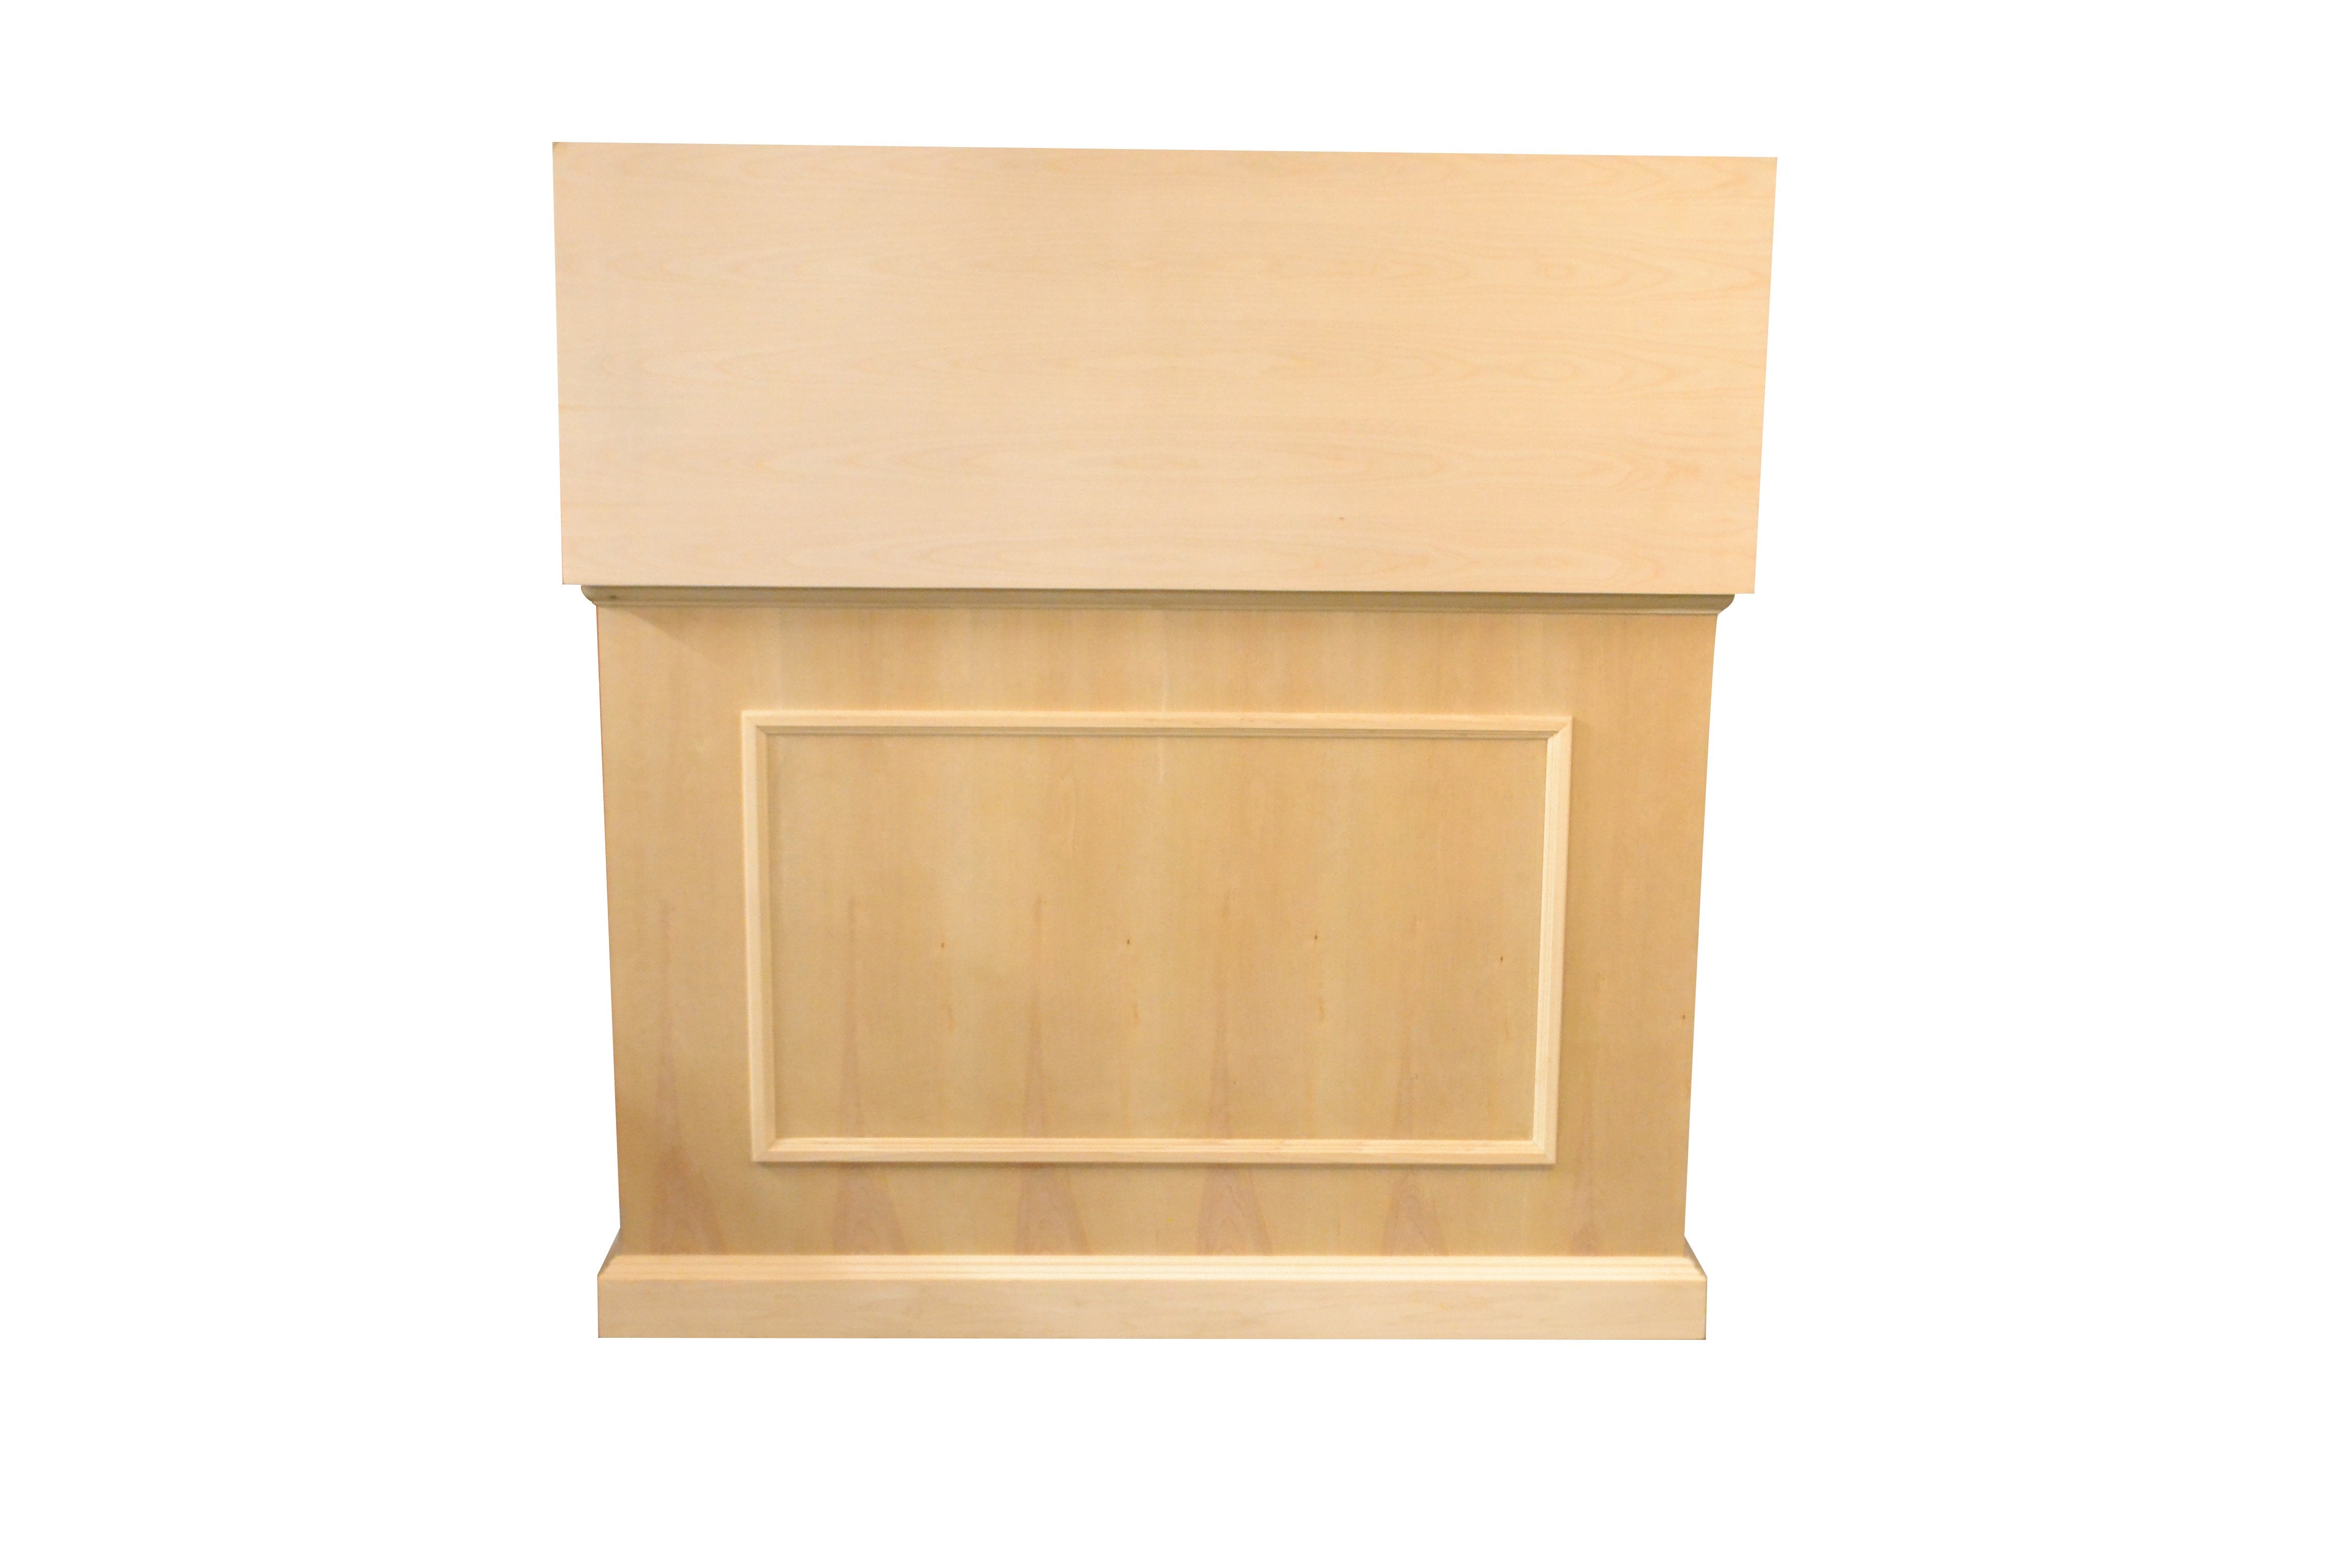 Mini Elevate 75012 Unfinished TV Lift Cabinet for Flat screen TVs with top open from the back.